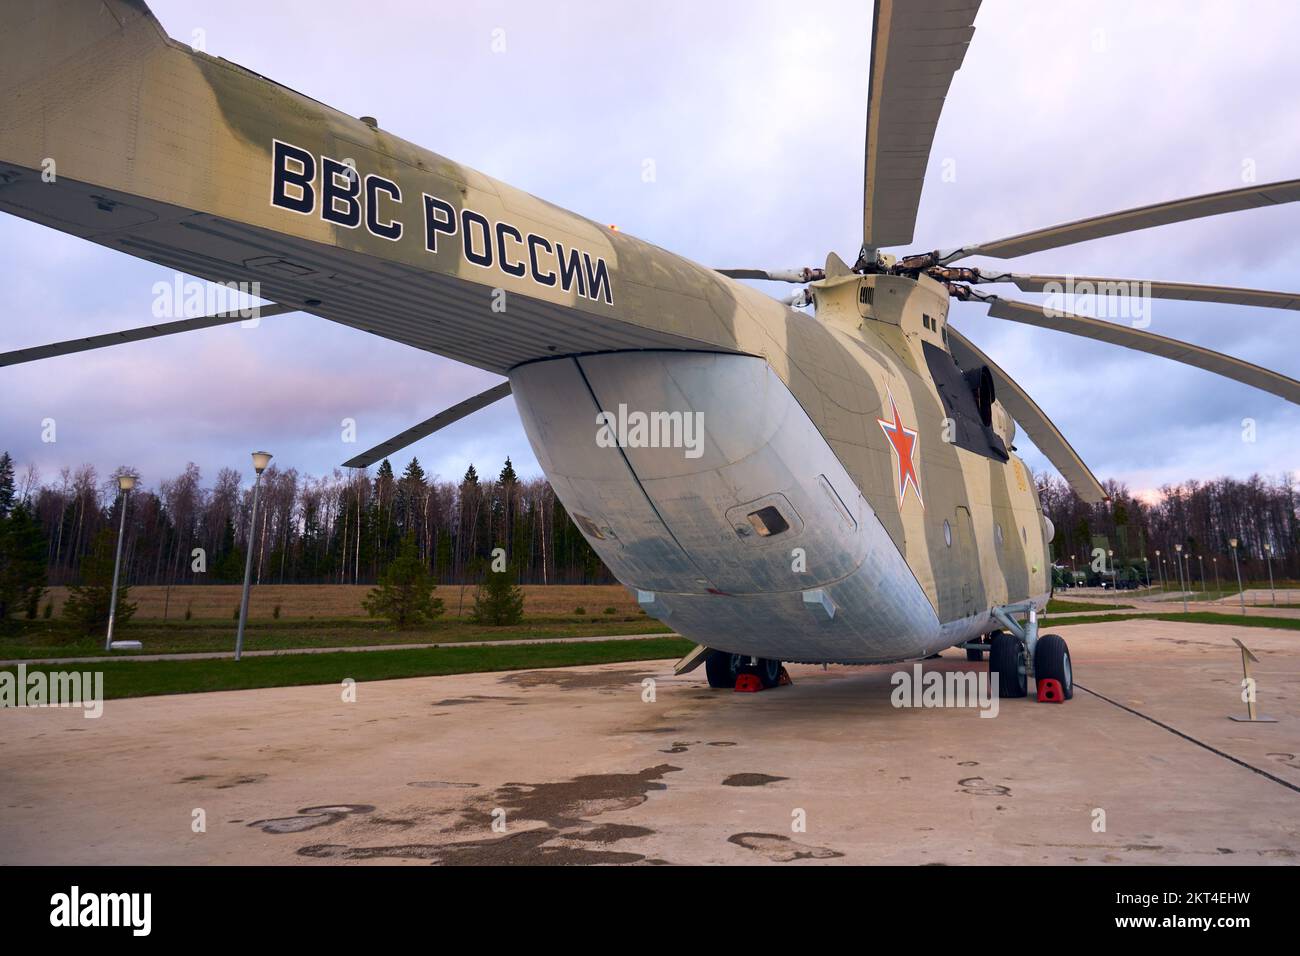 Russian Air Force Mi-26 heavy transport helicopter, rear view Stock Photo